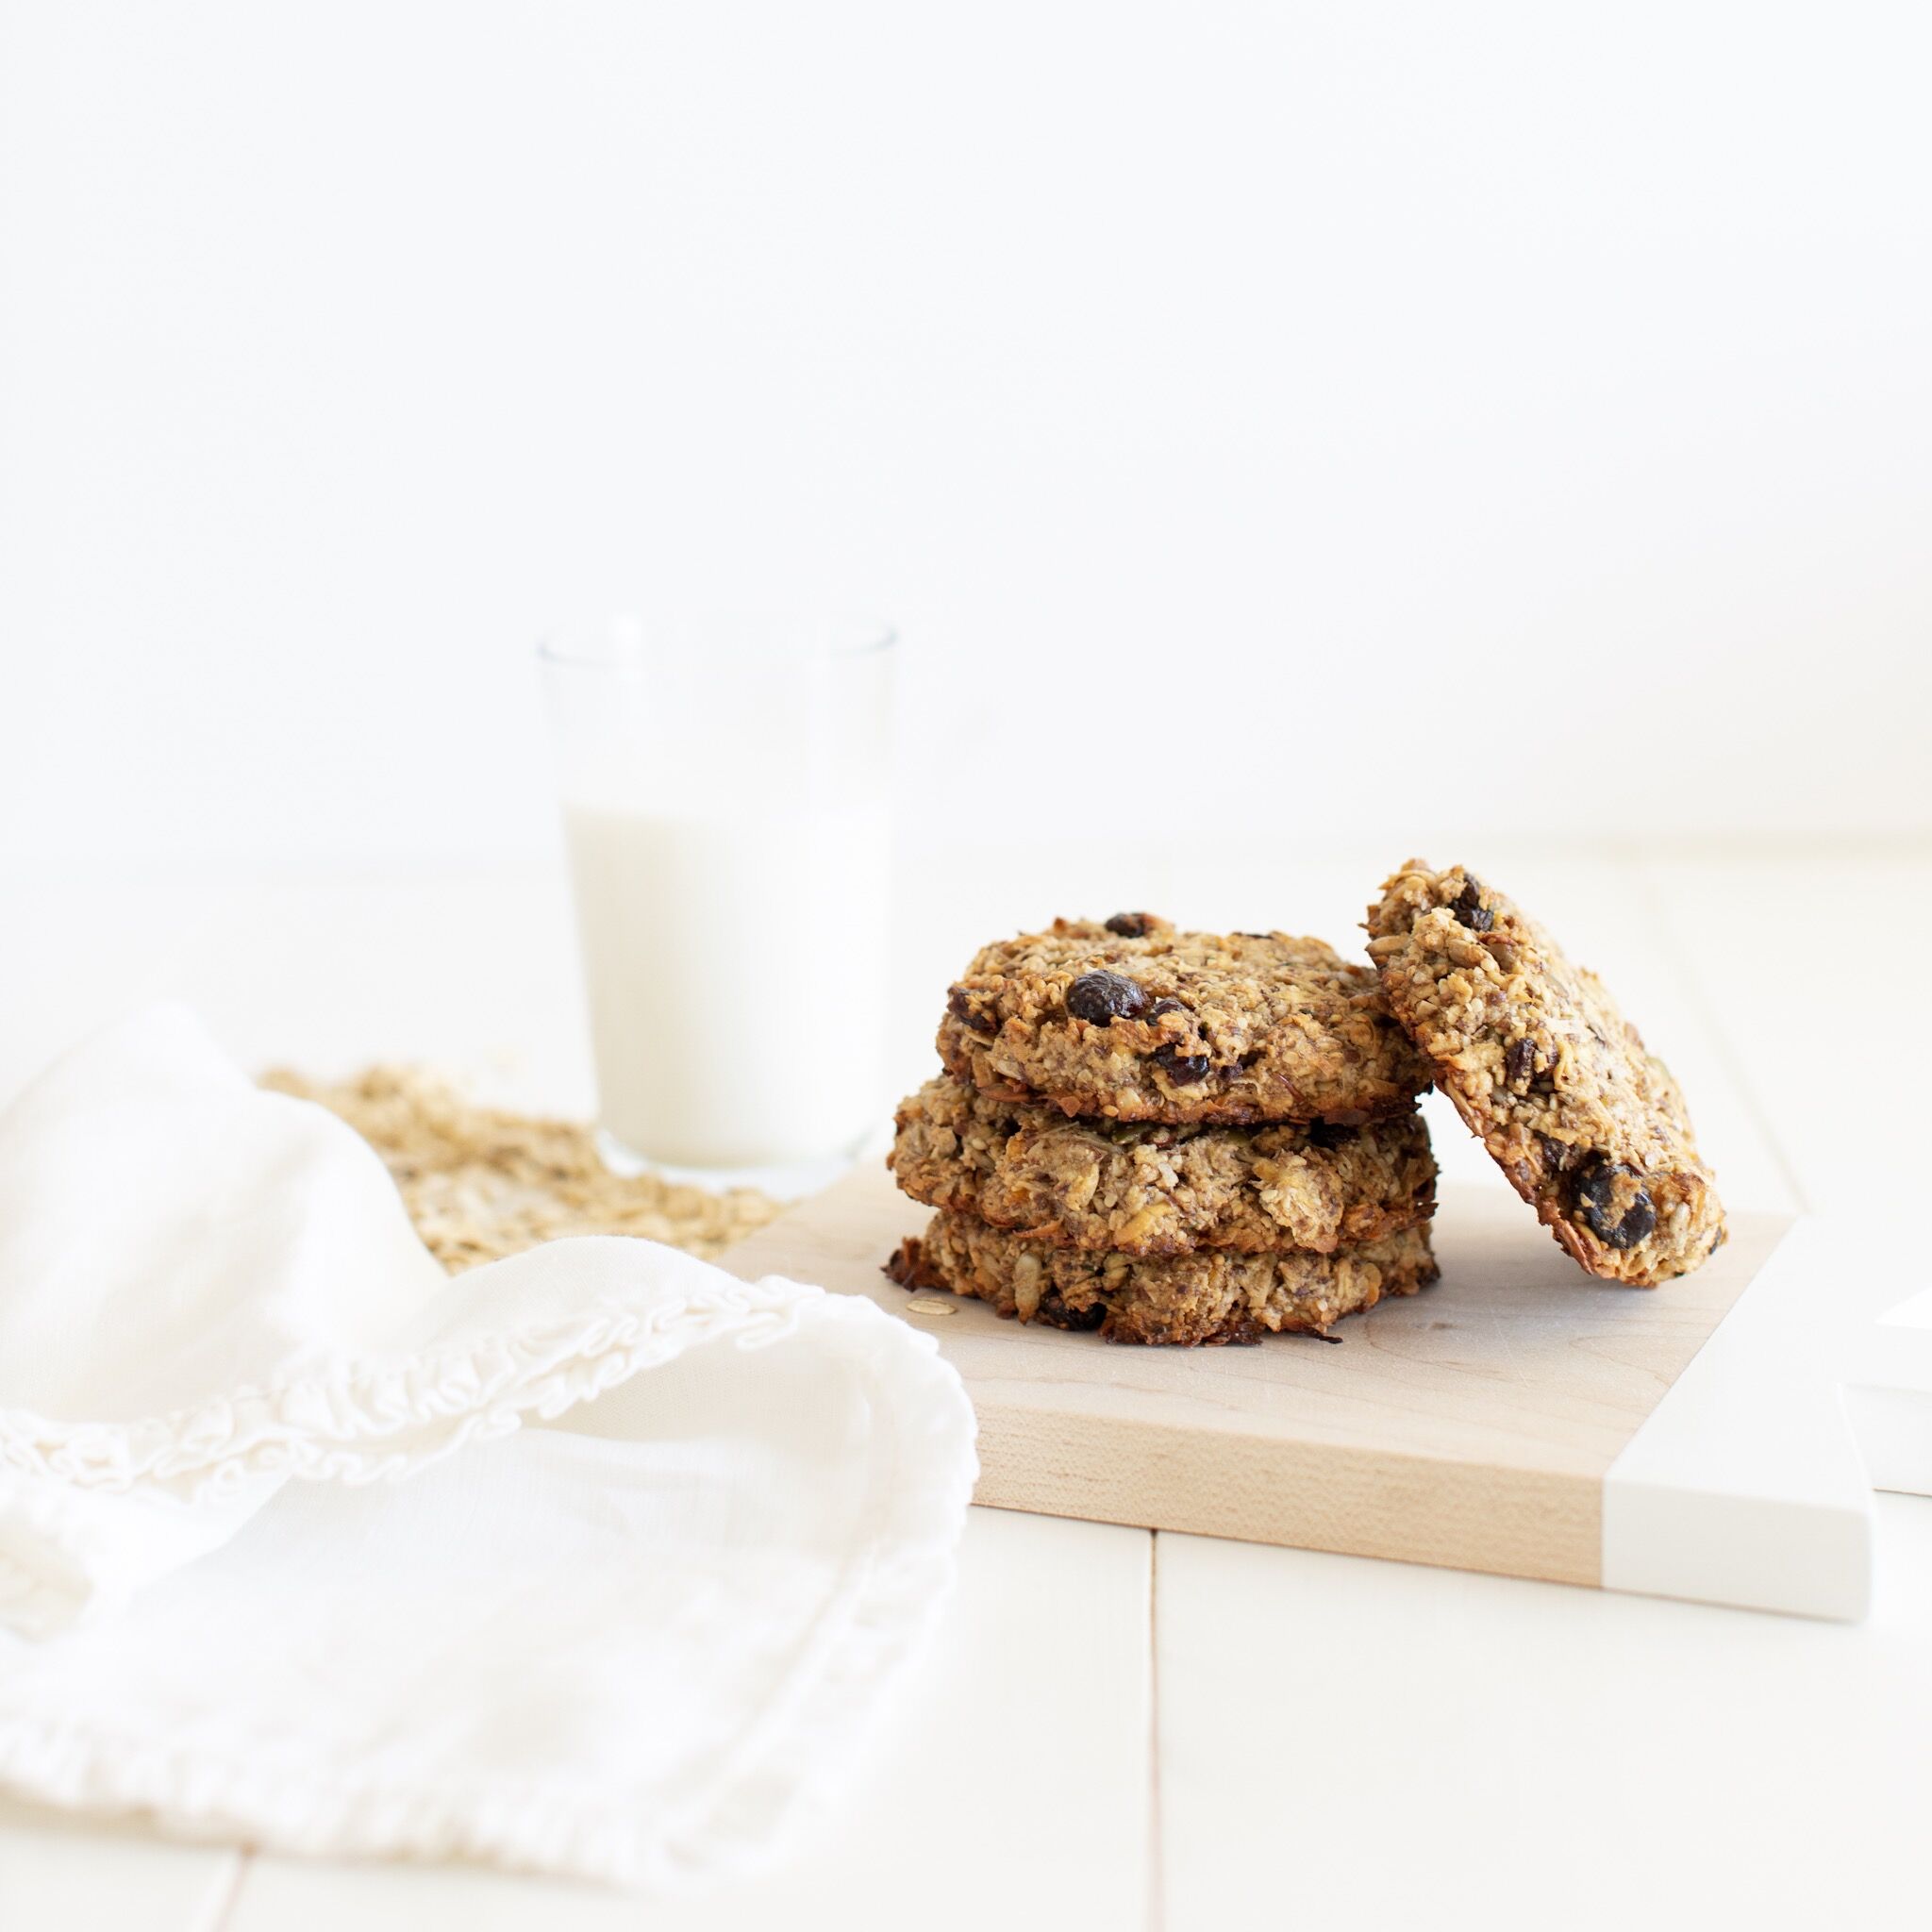 Breakfast Power Cookies that are gluten free and vegan made with whole grain oats, nuts, seeds and coconut to help give you energy for your day!